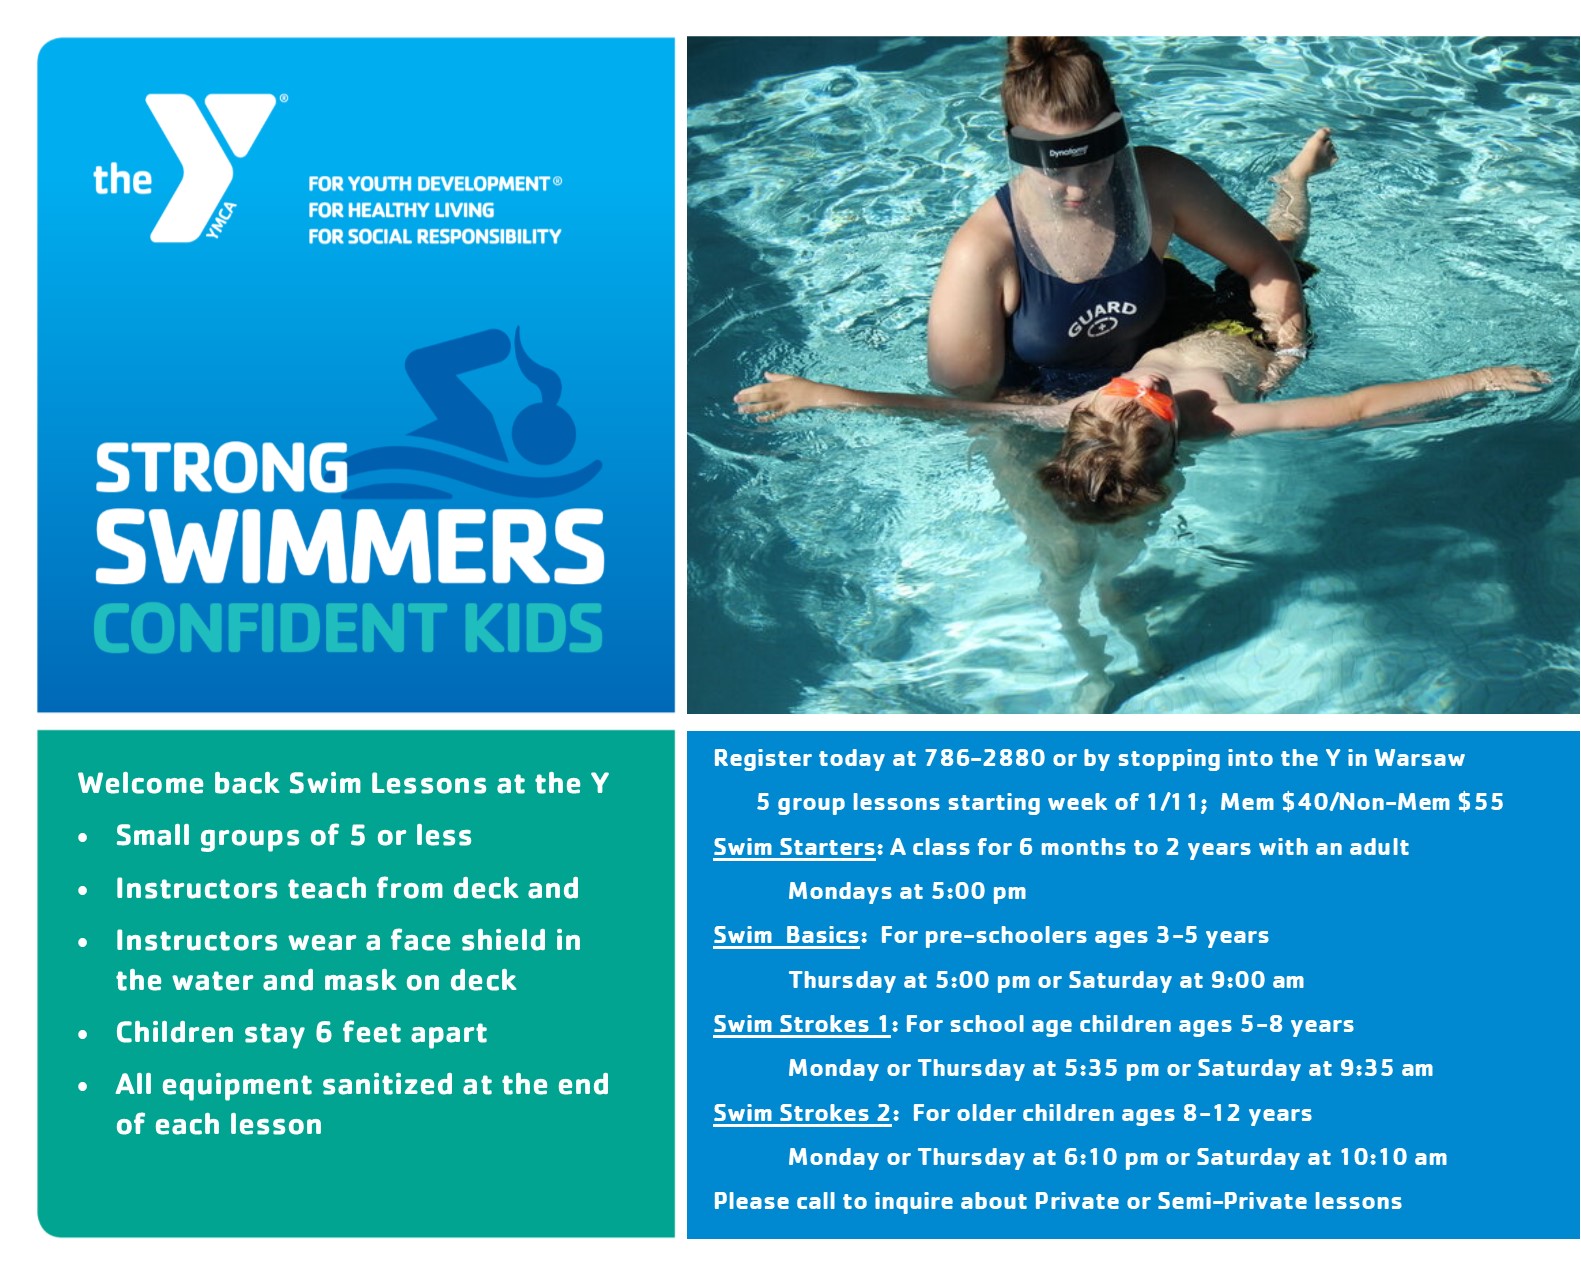 Image text: Strong swimmers, confident kids. Welcome back swim lessons at the Y: Small groups of 5 or less; instructors teach from deck; instructors wear a face shield in the water and mask on the deck; children stay 6 feet apart; all equipment sanitized at the end of each lesson. Register today at 786-2880 or by stopping into the Y in Warsaw. 5 group lessons starting the week of 1/11; Member price $40, non-member price $55. Swim starters 1 and 2: A class for 6 months to 3 years with an adult, Mondays at 5 p.m. Levels 1 and 2: for pre-schoolers ages 3-5 years, Thursdays at 5 p.m or Saturday at 9 a.m. Levels 3 and 4: For school age children ages 5 to 8 years, Monday or Thursday at 5:35 p.m. or Saturday at 9:35 a.m. Levels 5 and 6: For older children ages 8 and up, Monday or Thursday at 6:10 p.m. or Saturday at 10:10 a.m. Please call to inquire about private or semi-private lessons.